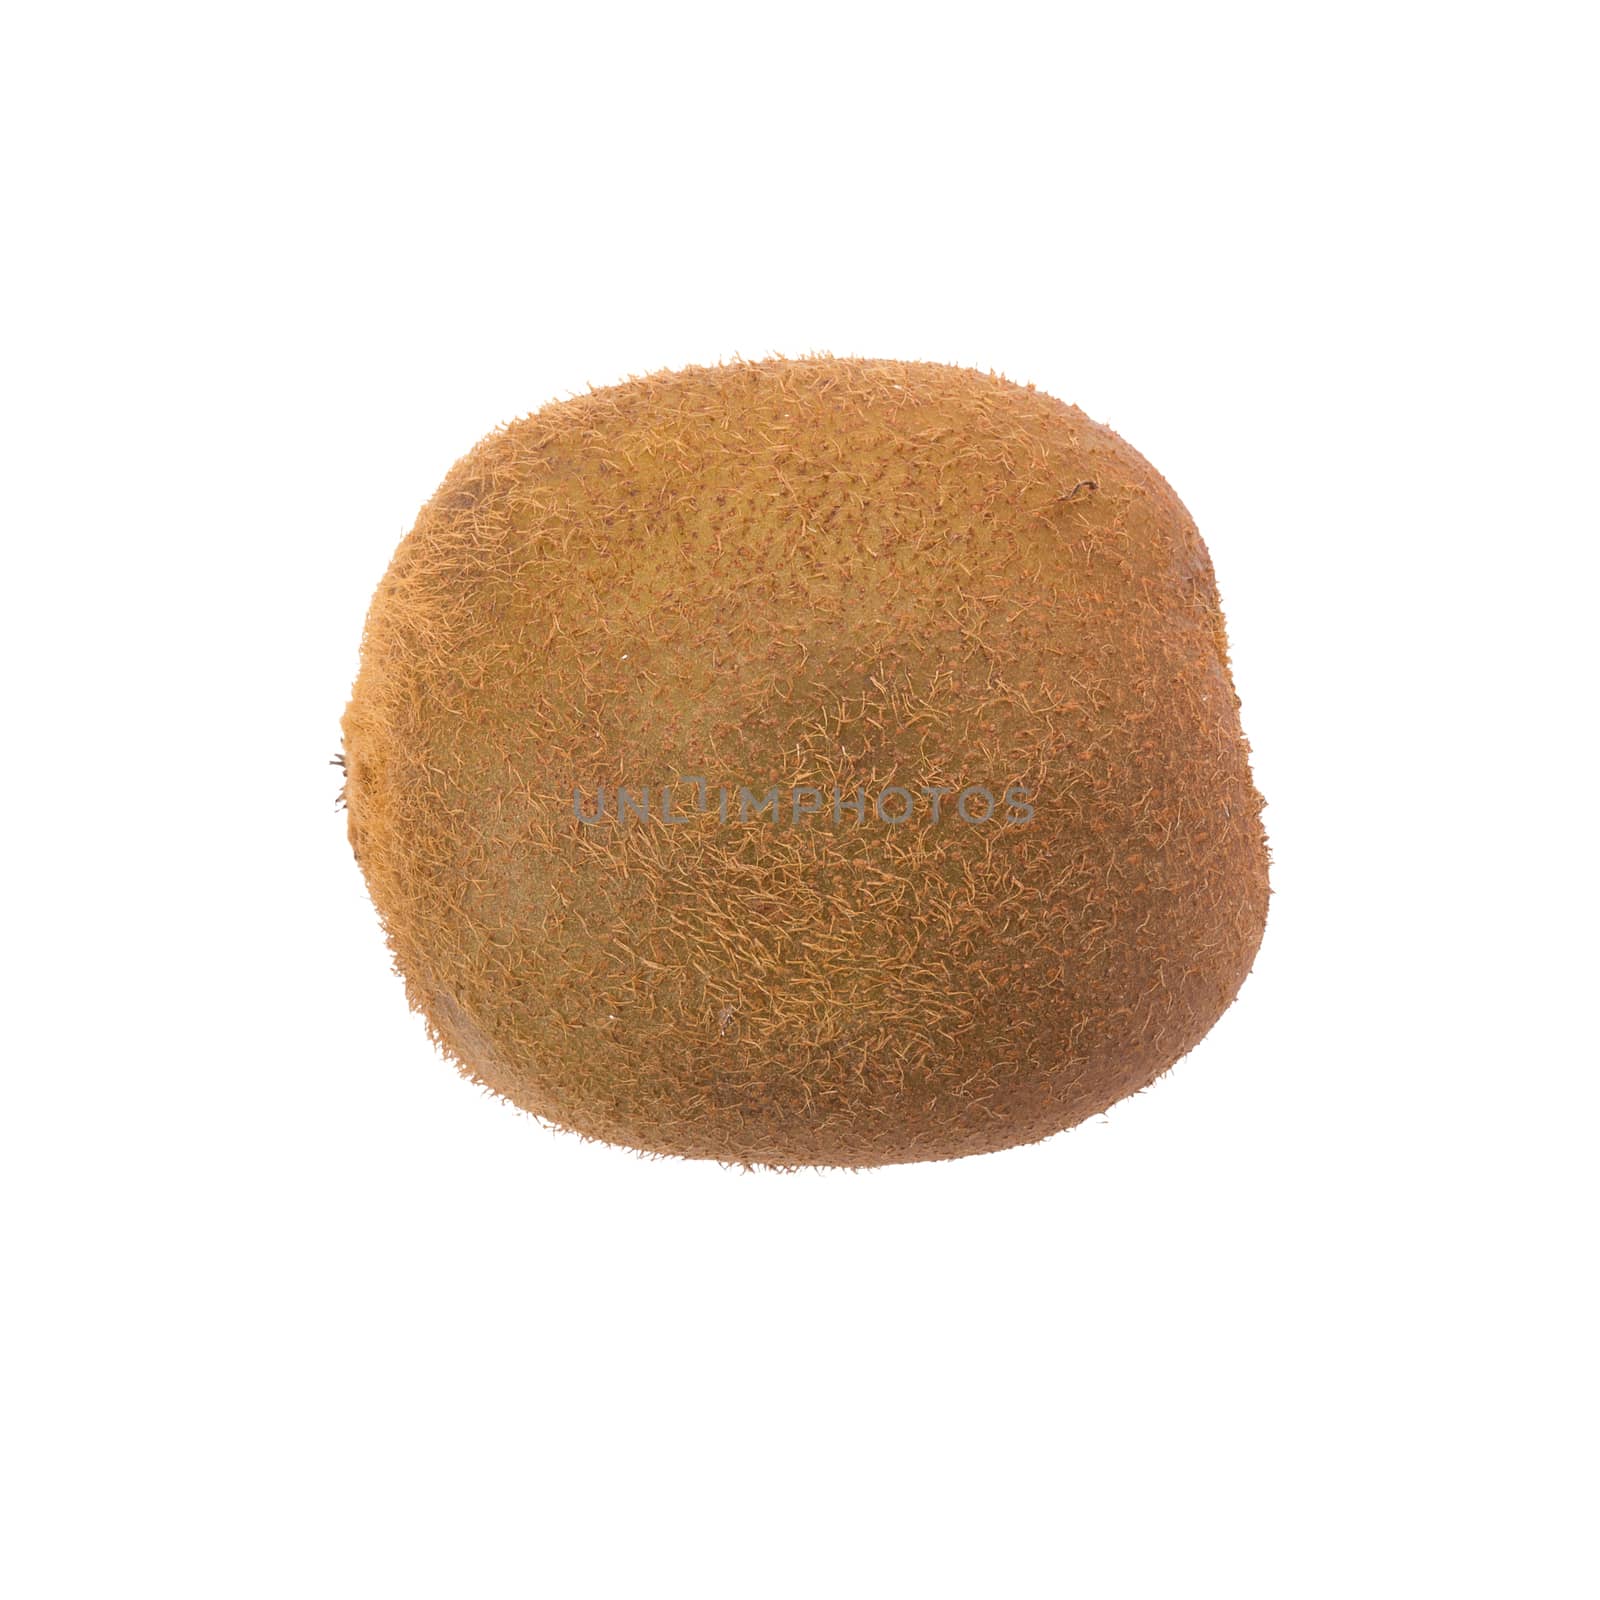 kiwi isolated on white background, top view.